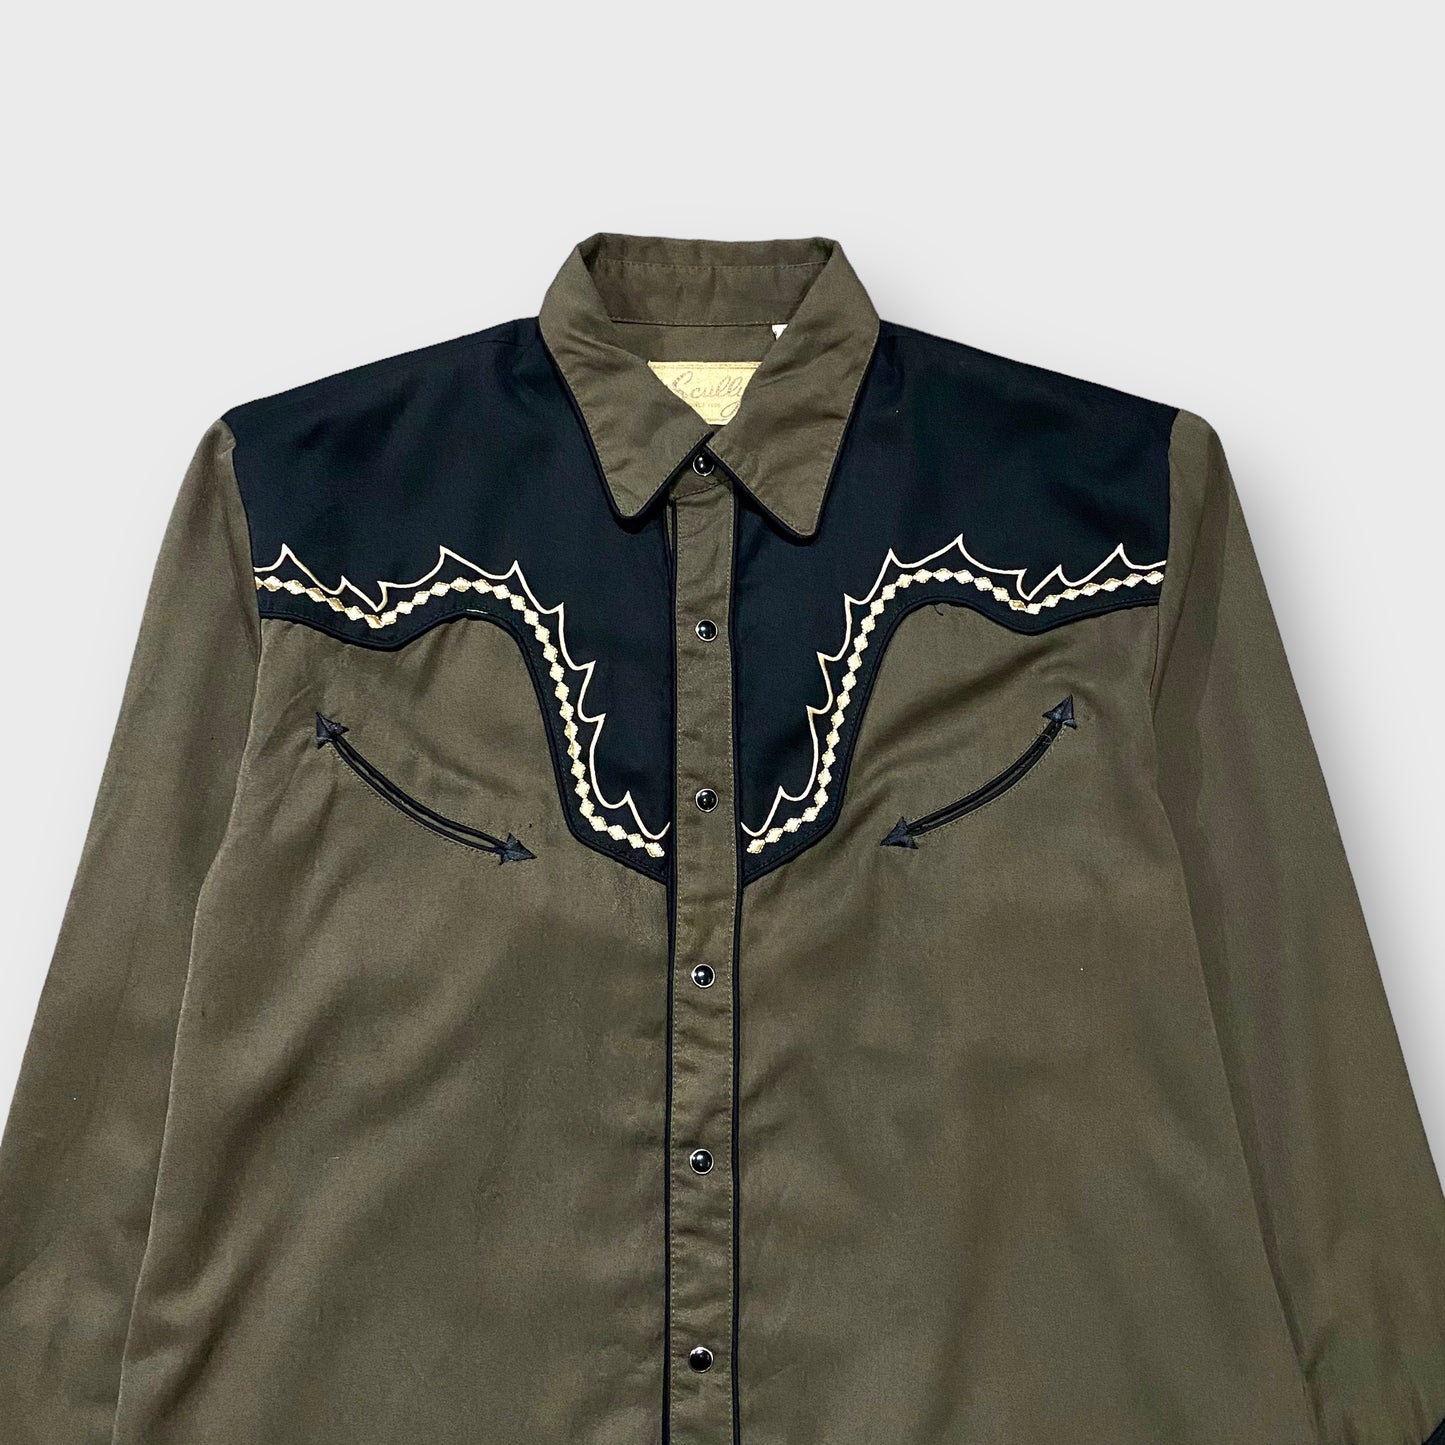 90's "Scully" Embroidery western shirt